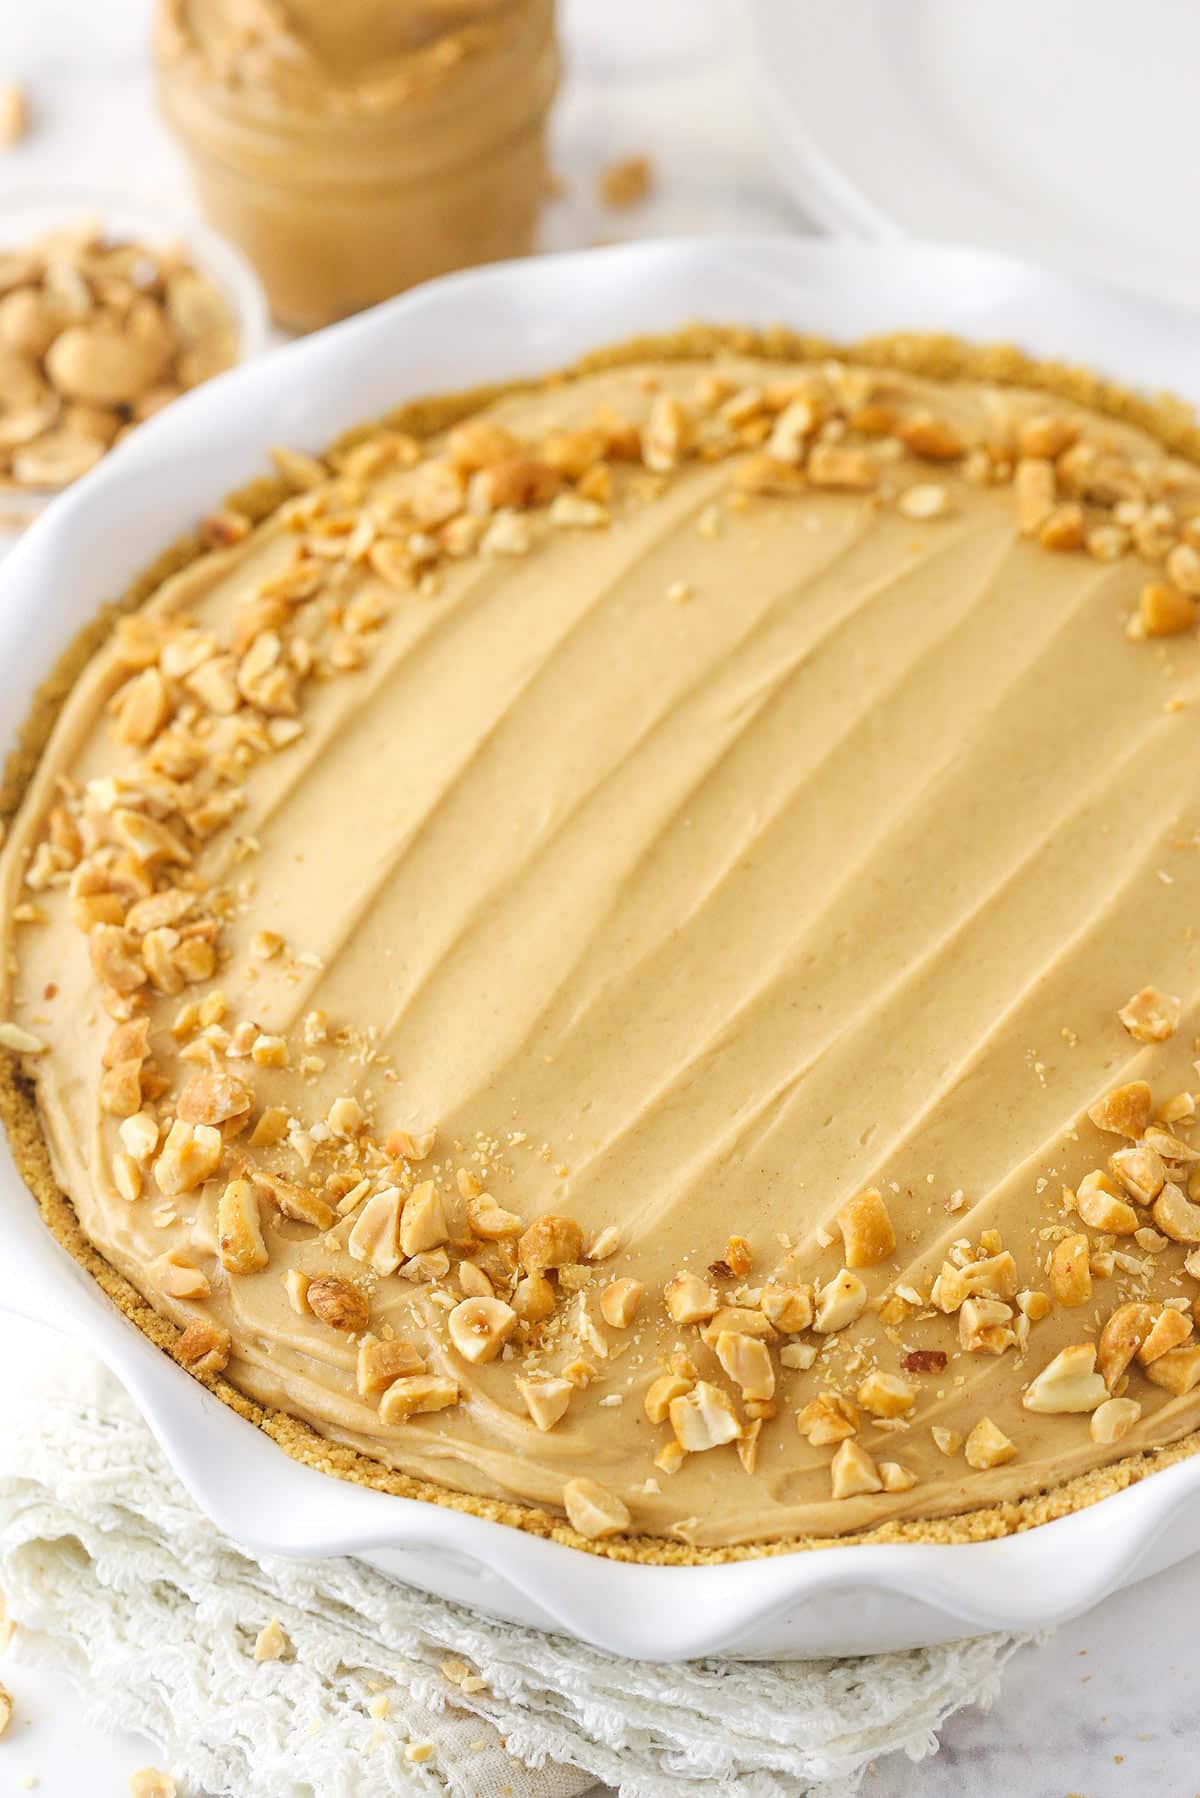 A whole peanut butter pie in a pie dish.